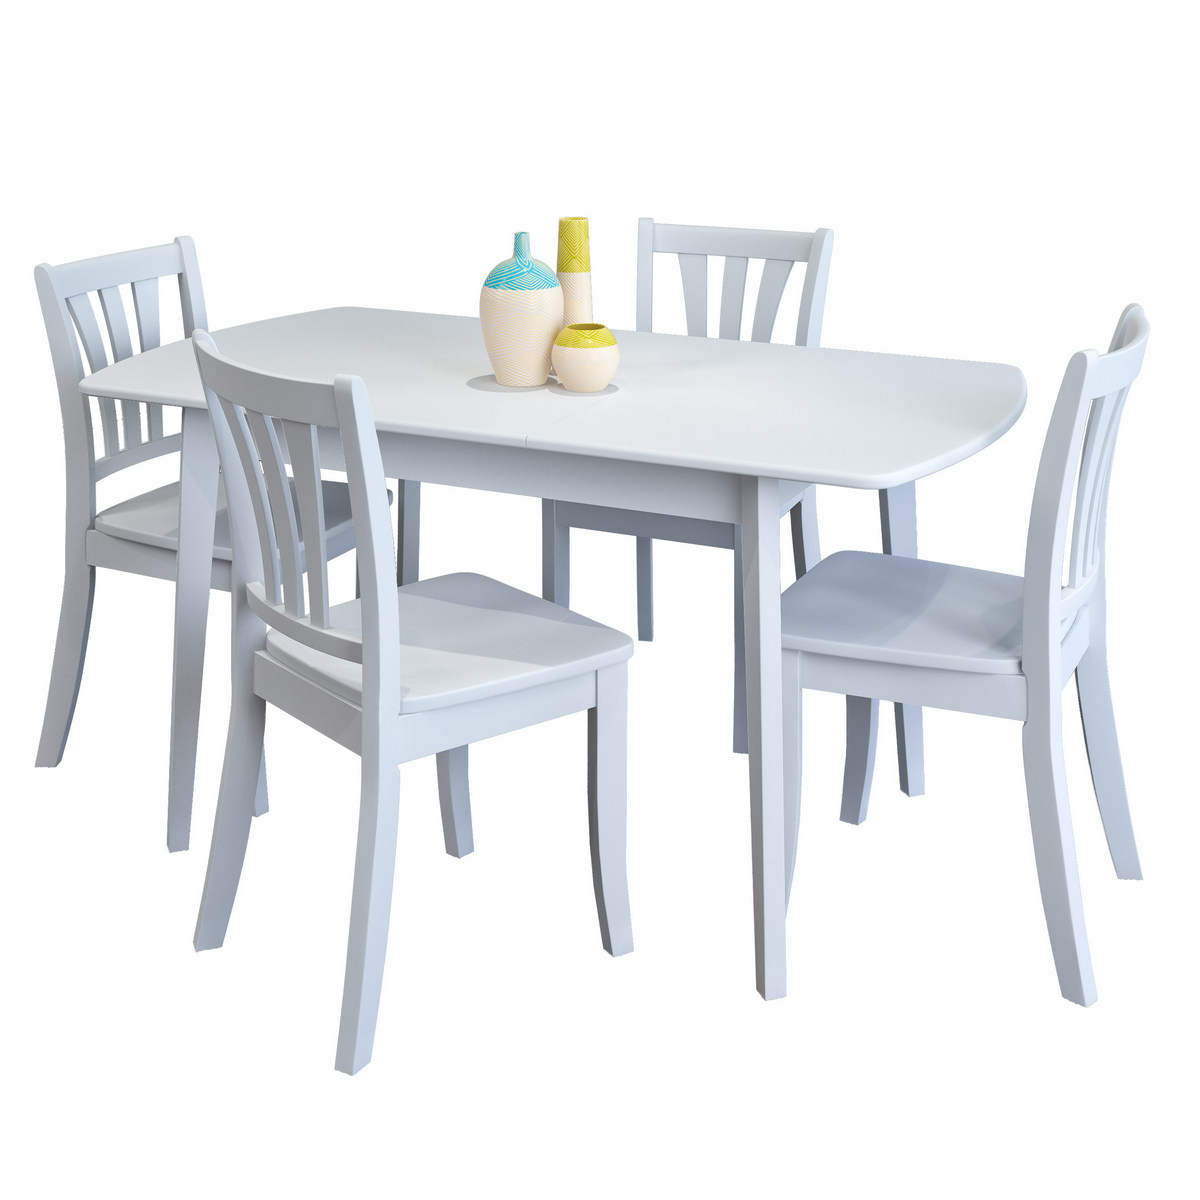 Corliving Extendable White Wooden Dining Set